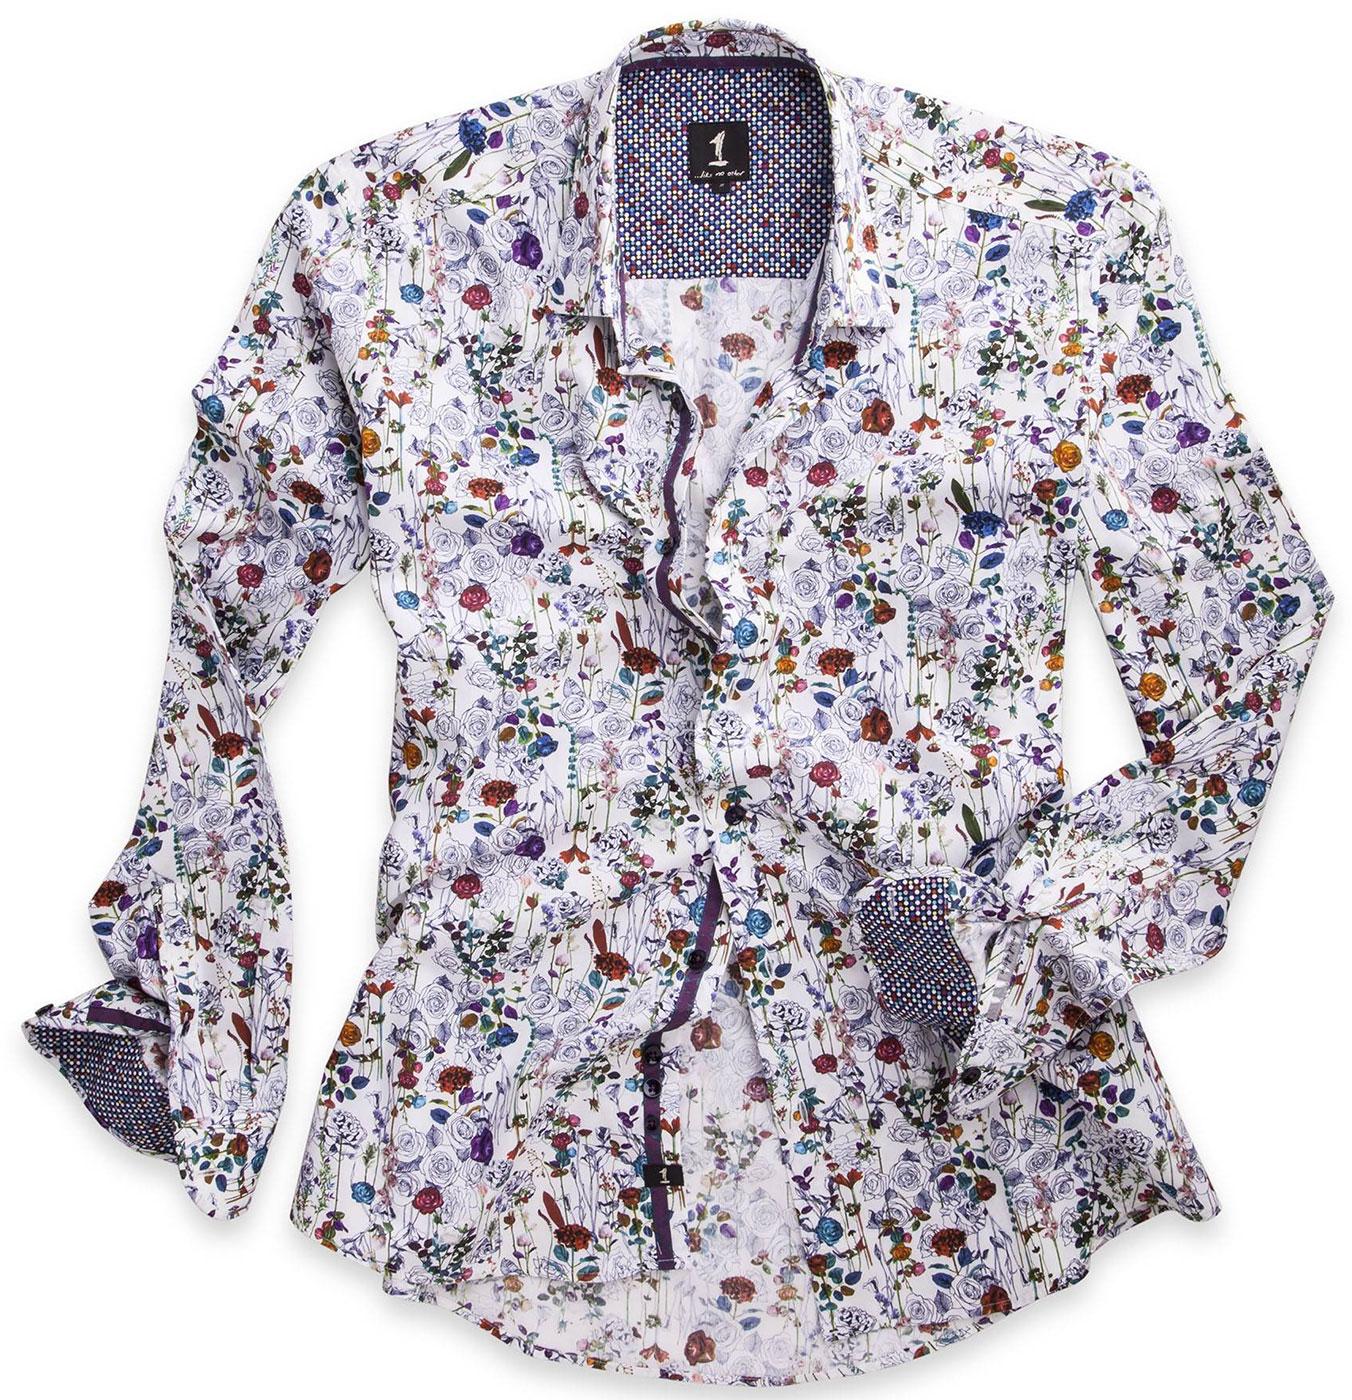 Epitia 1 LIKE NO OTHER Retro 1960s Floral Shirt